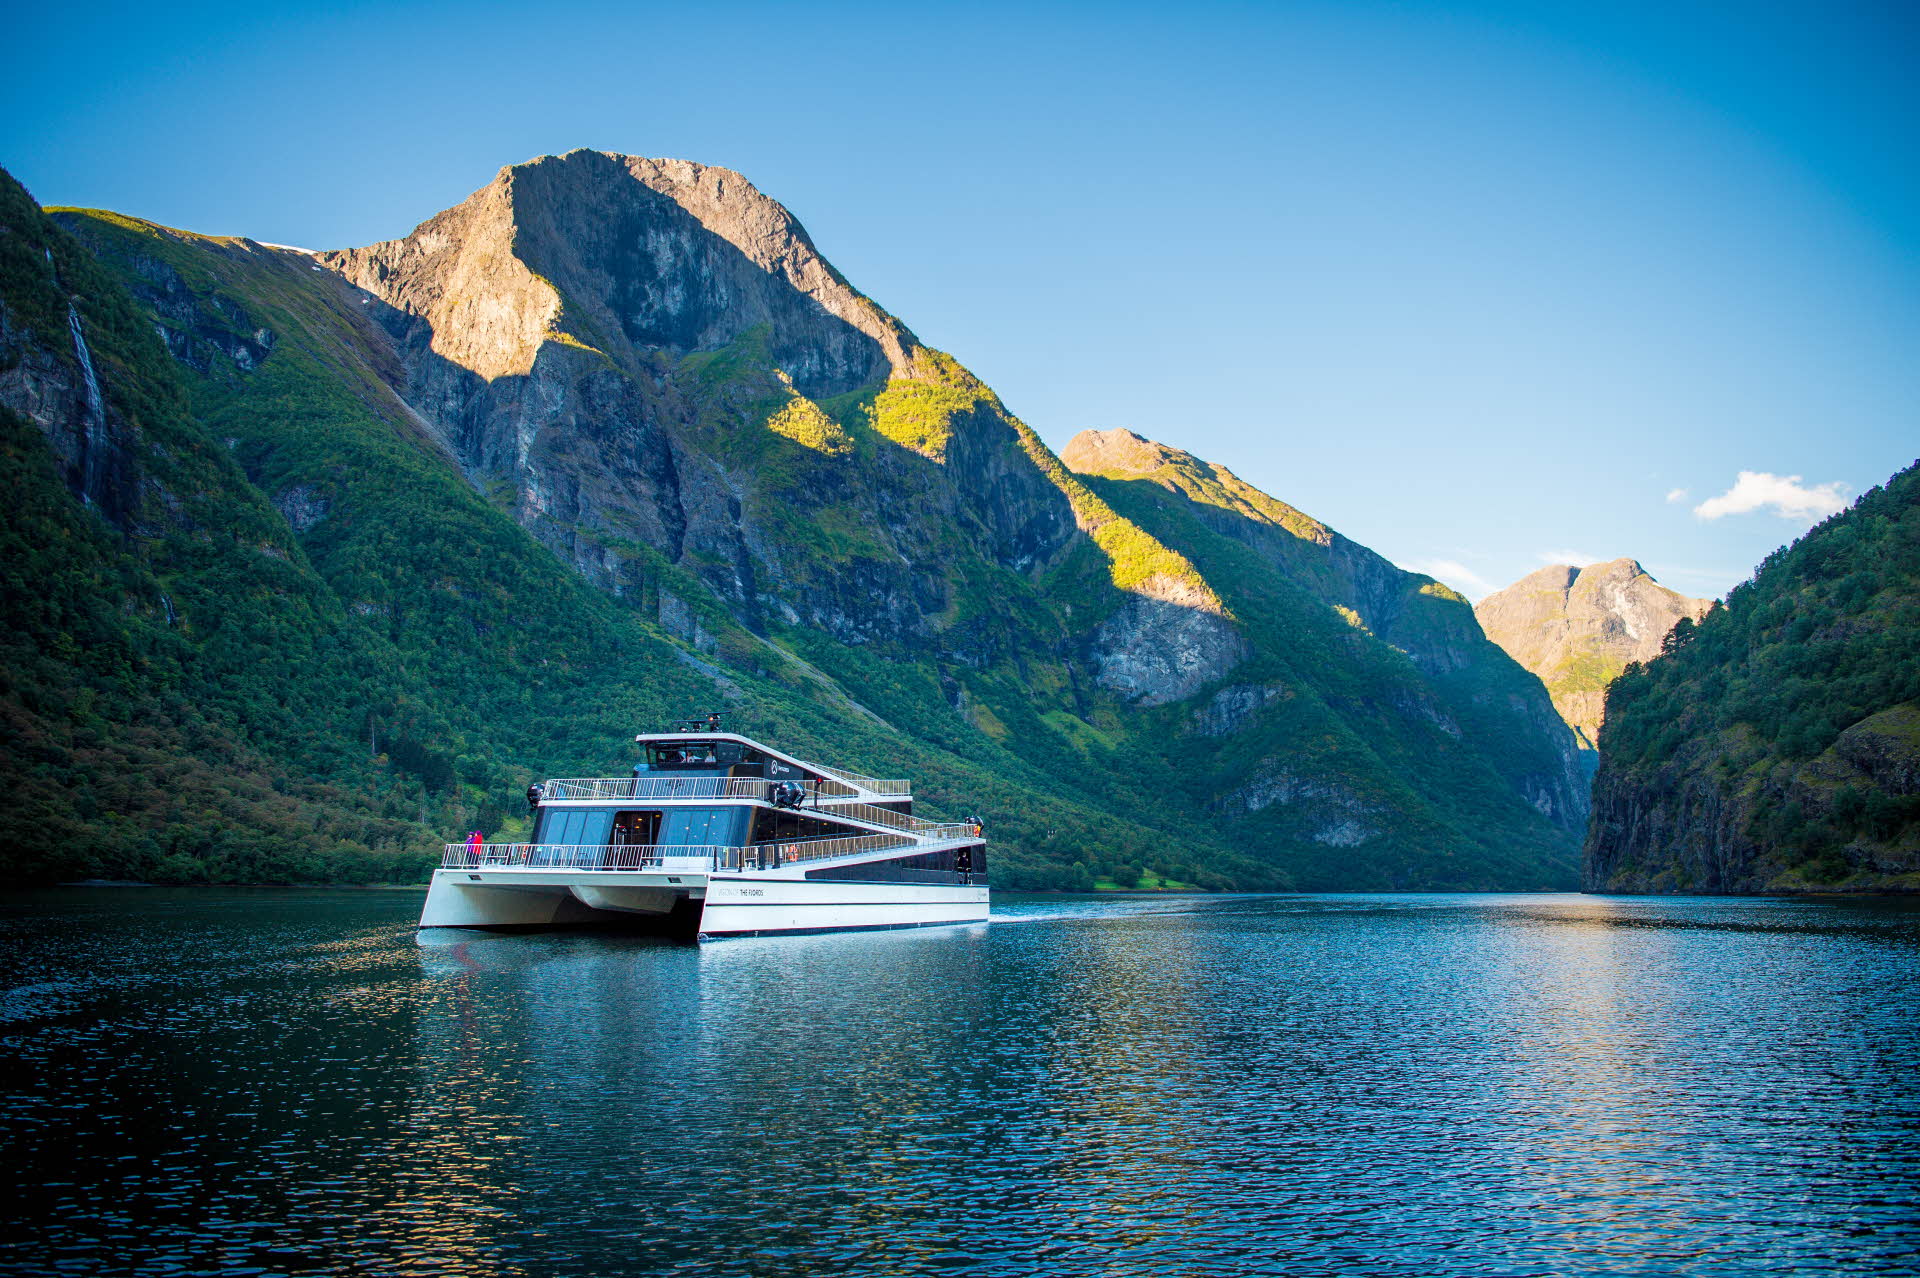 Future of The Fjord sailing in the calm and narrow UNESCO listed Naeroyfjord in summer. Tall mountains in background.